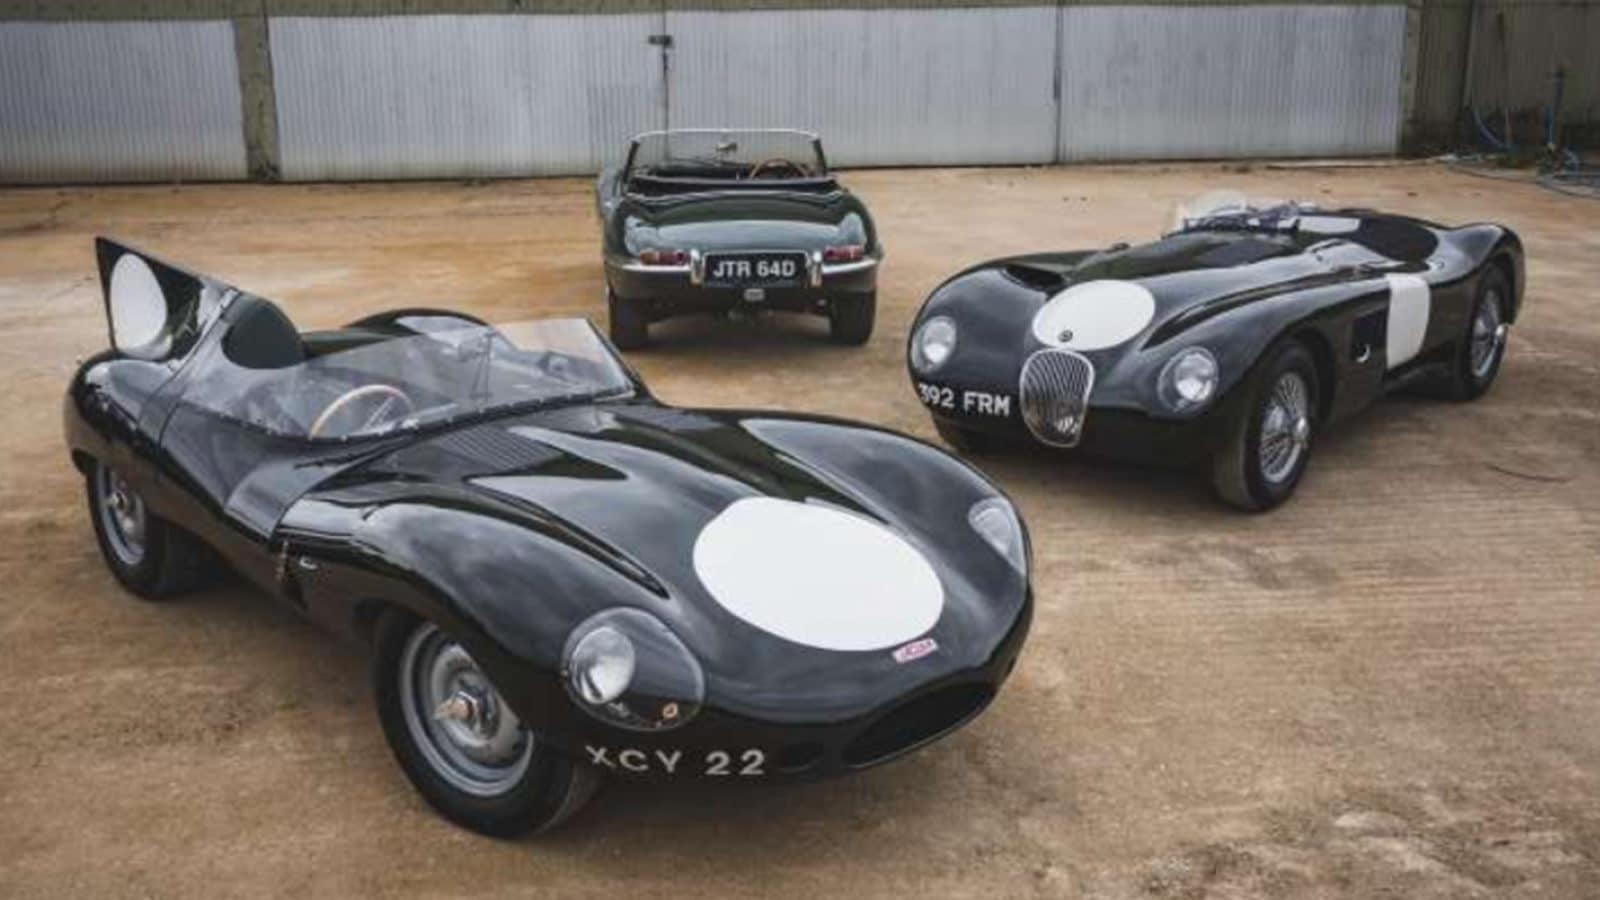 The Market Swann Collection of Jaguars